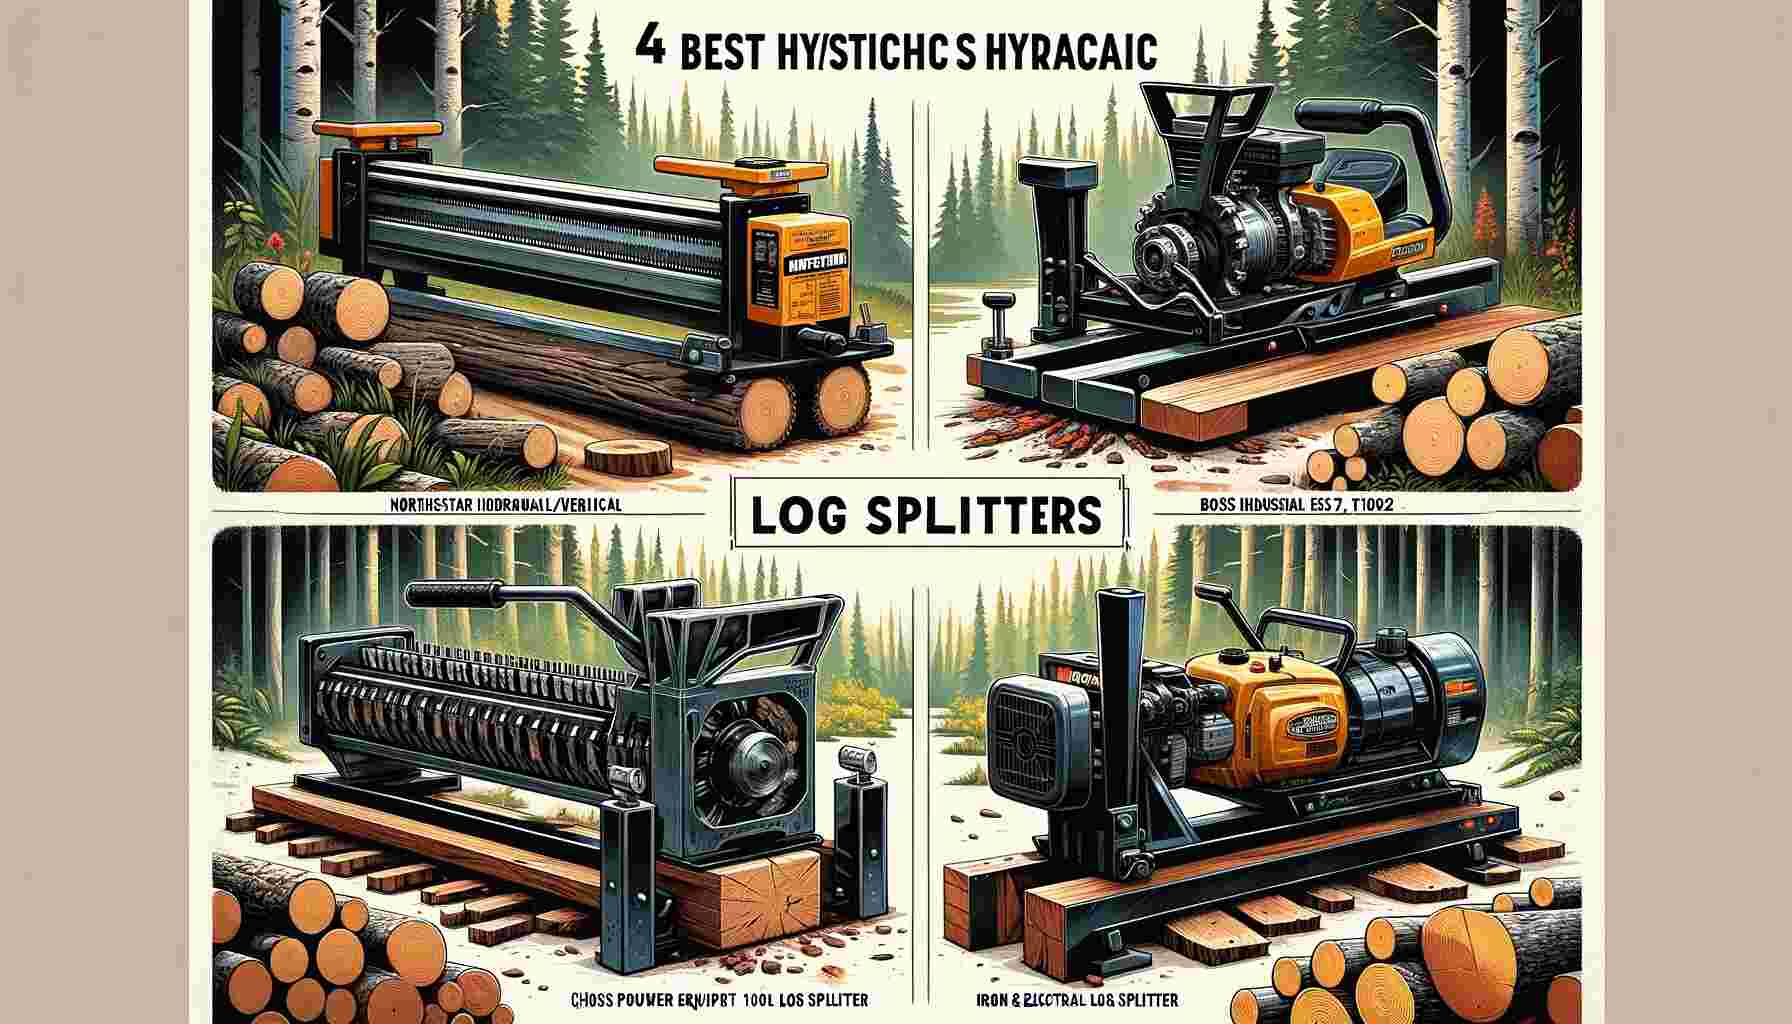 Here is an image representing the "4 Best Hydraulic Log Splitters." The image displays the four different log splitter models, each with their key features, arranged in an outdoor setting.